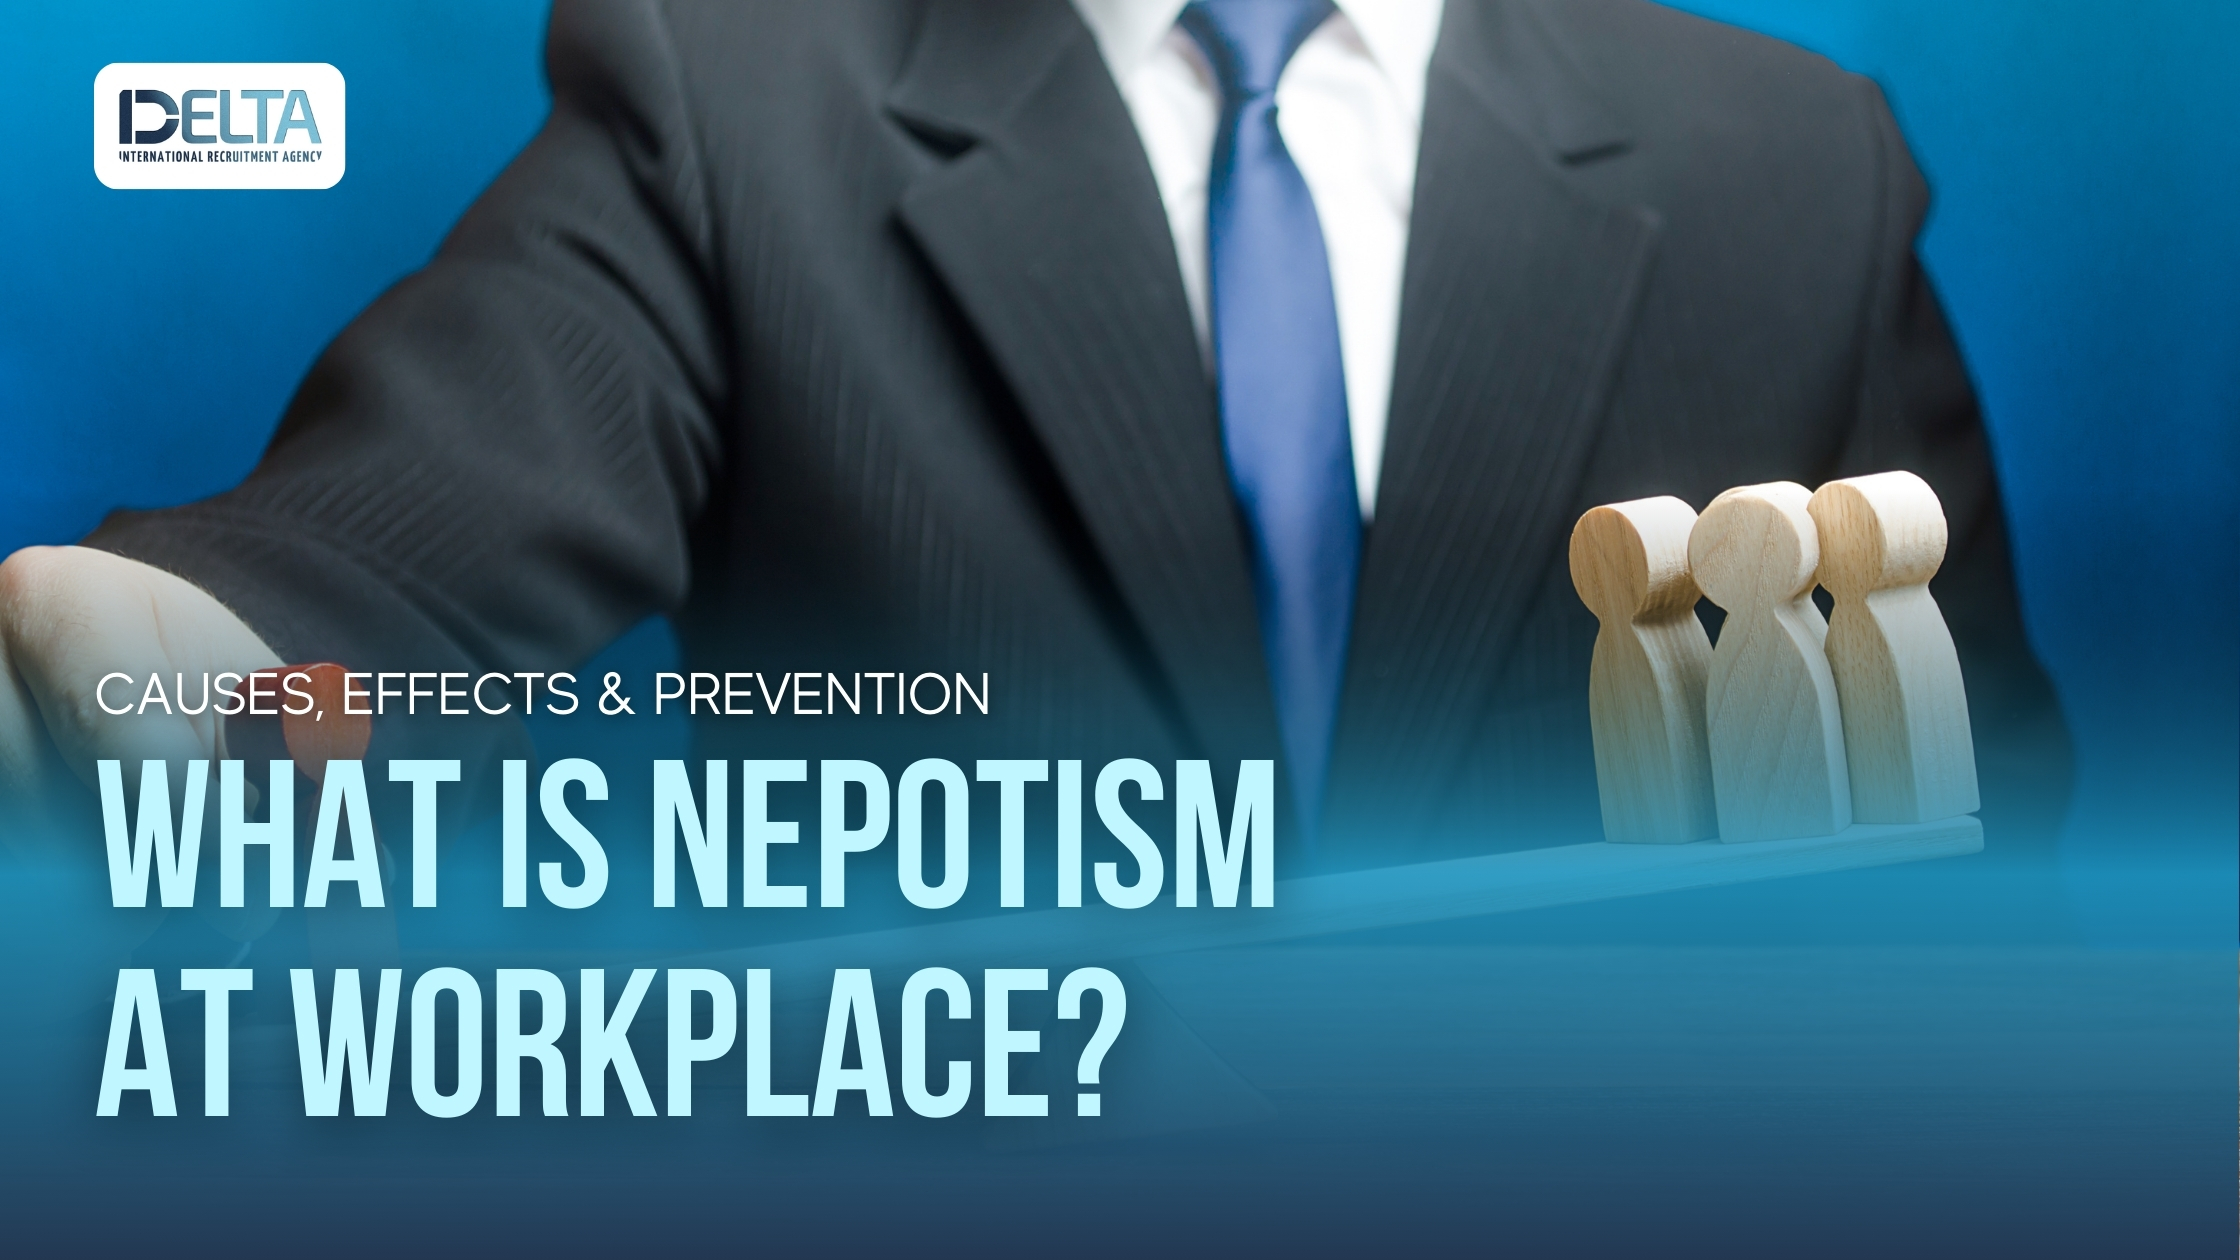 What is Nepotism at Workplace? Causes, Effects & Prevention